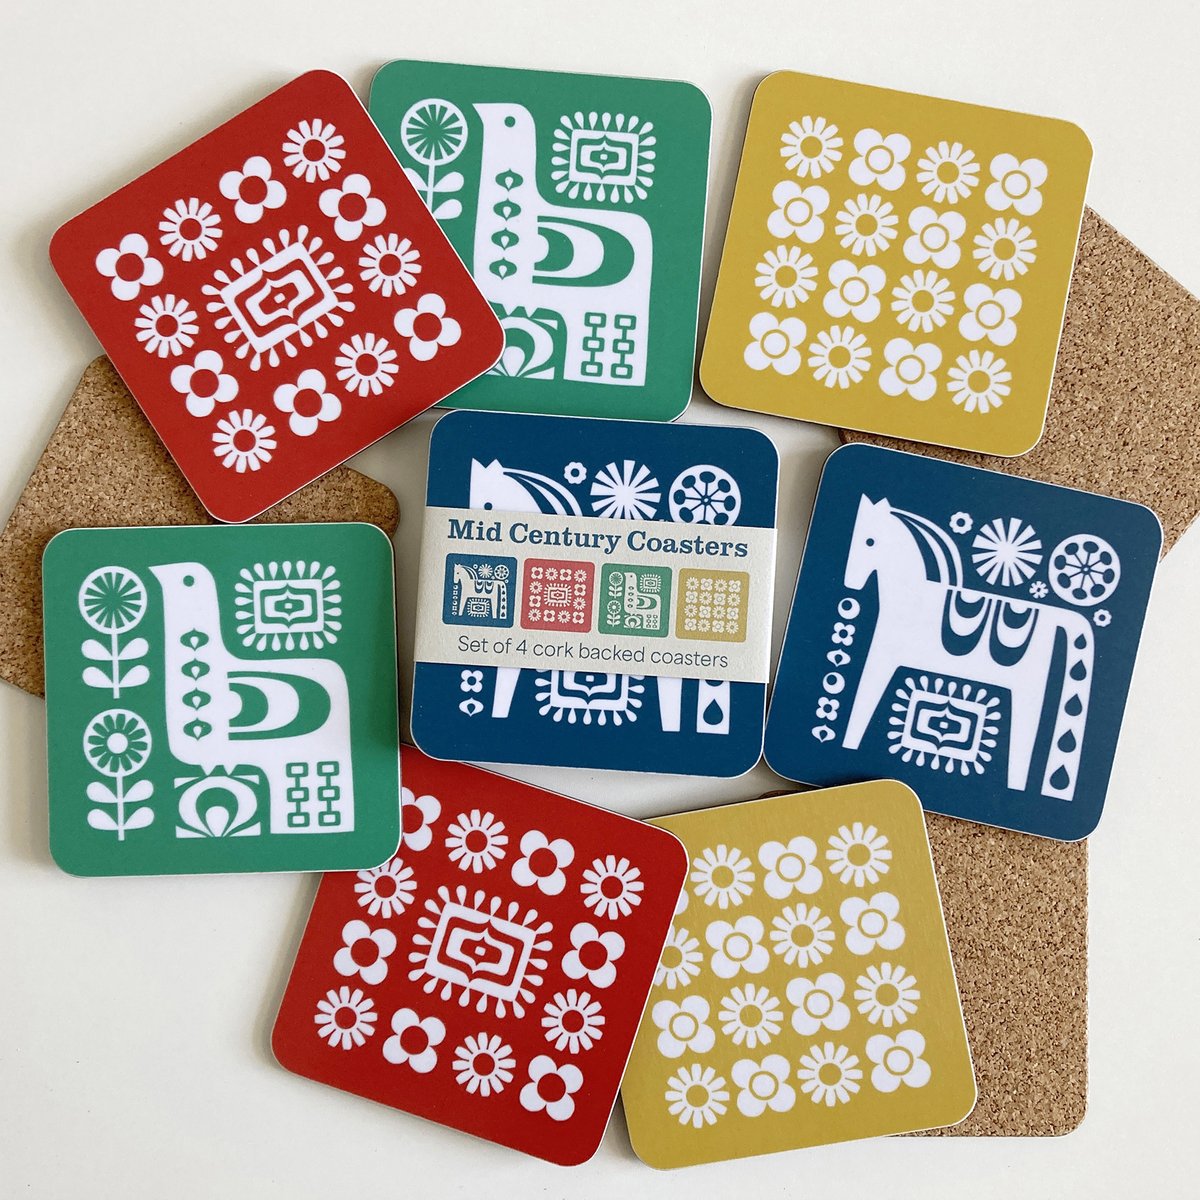 I’ve just had a delivery of some Mid Century Coaster sets, having run out of them a few months ago. I’m SO pleased with them. The designs are based on my Scandi mid-century style screen-prints. They’re 10cm square and cork backed. My shop: etsy.me/2GiViMm